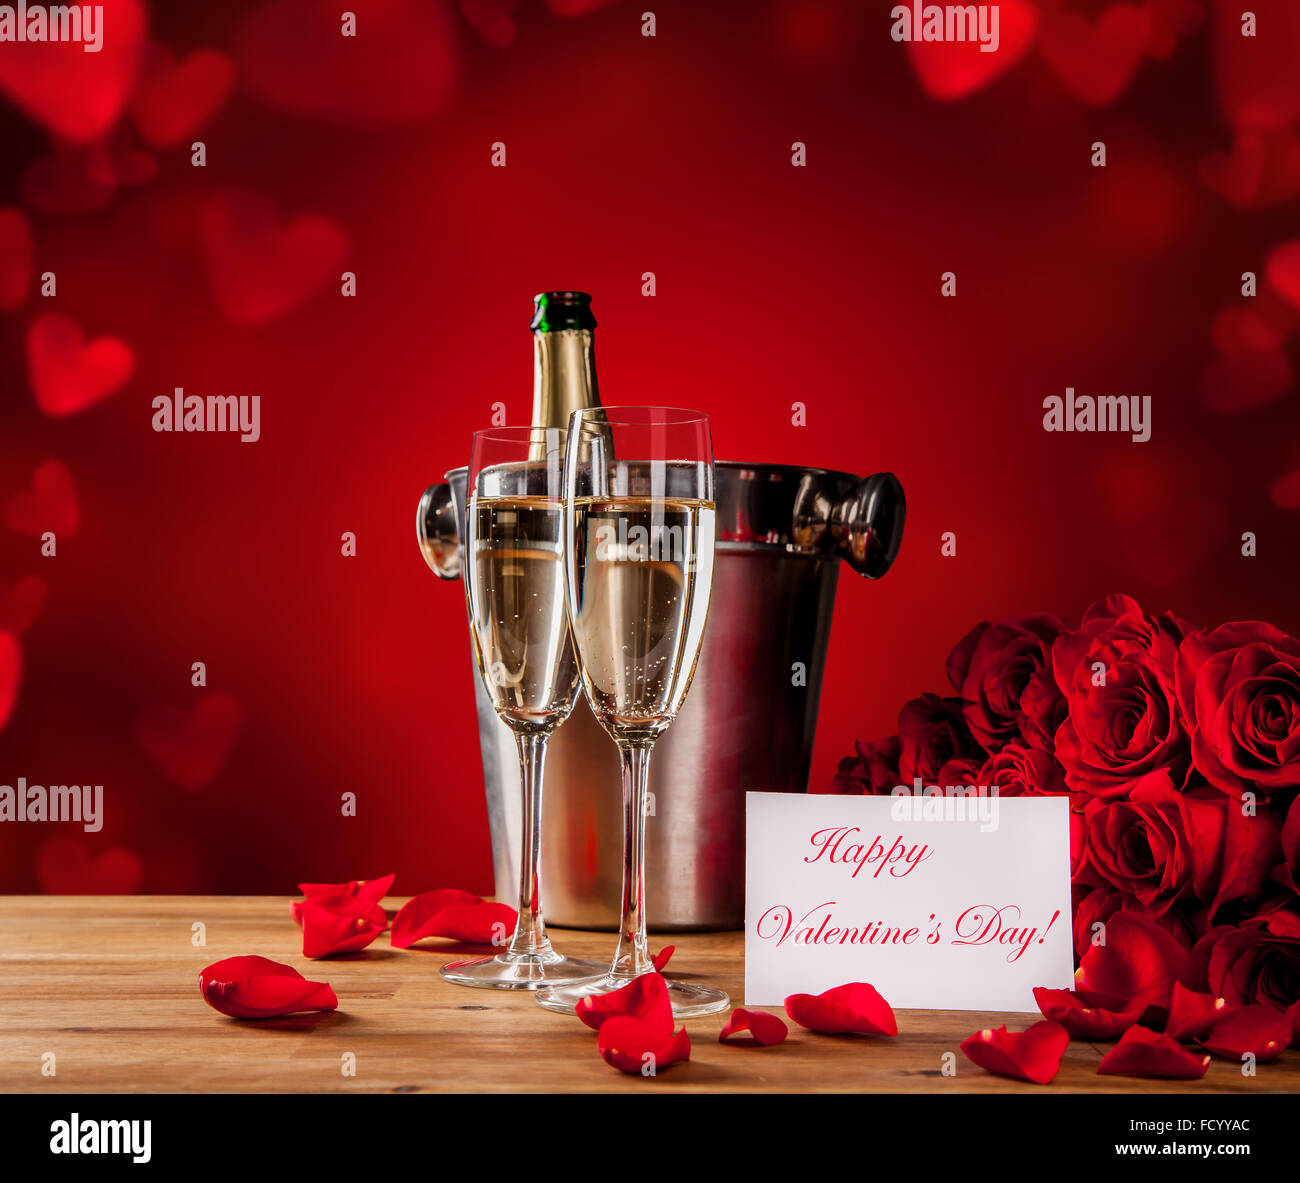 Valentines still life with champagne and roses Stock Photo